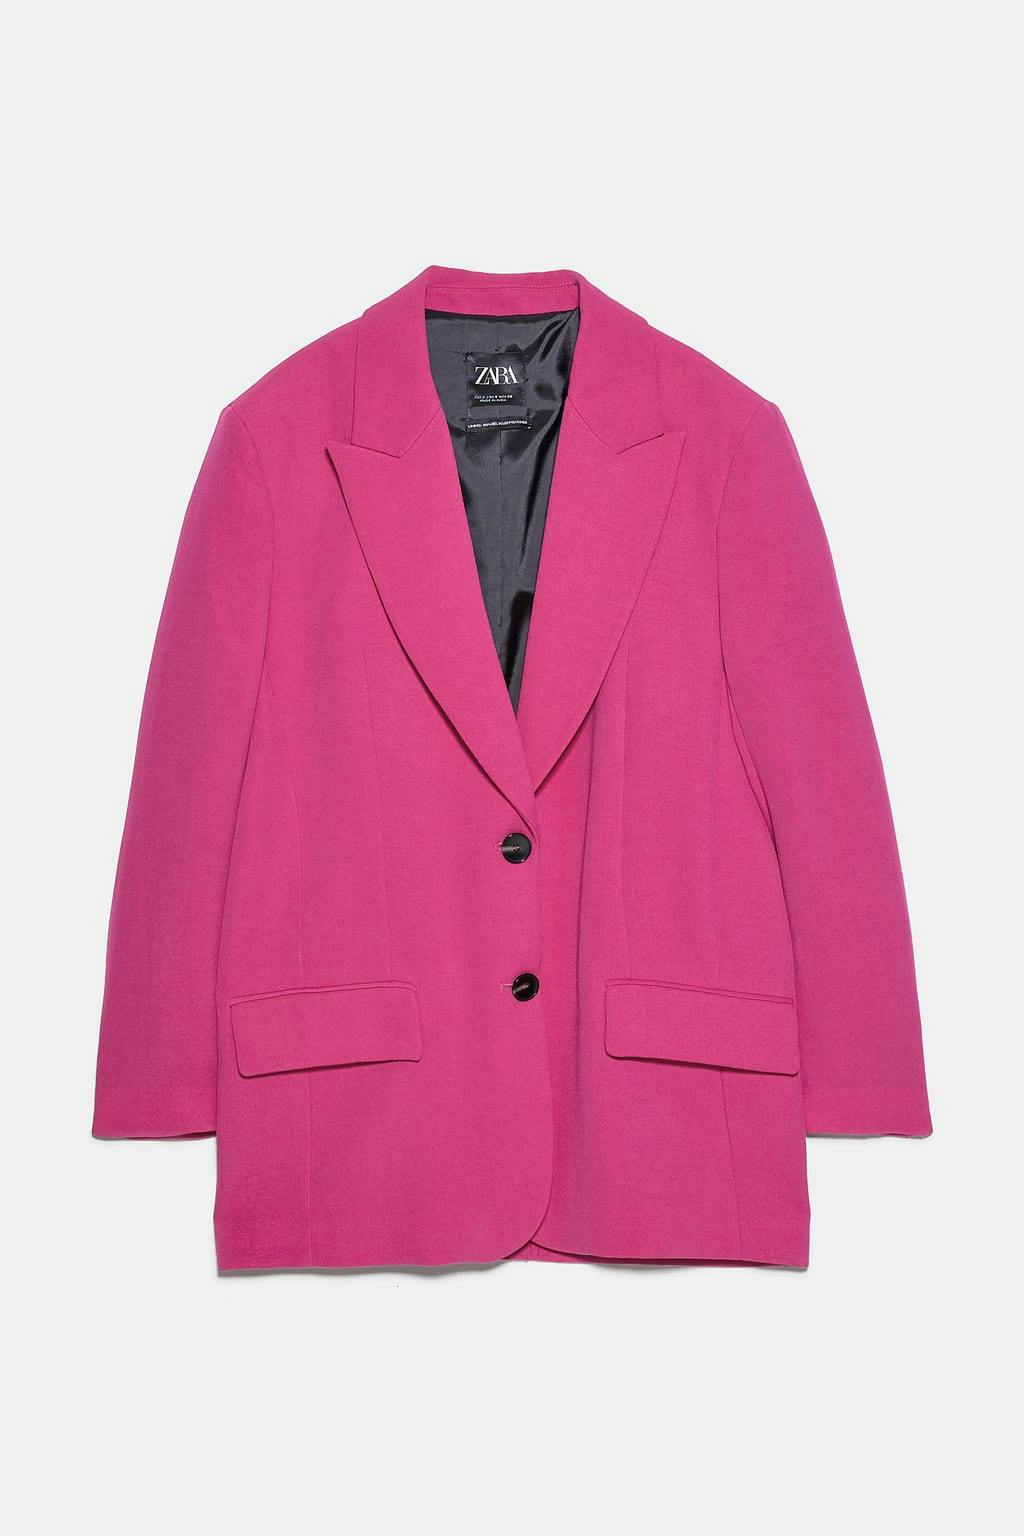 Oversized blazers and where to buy them